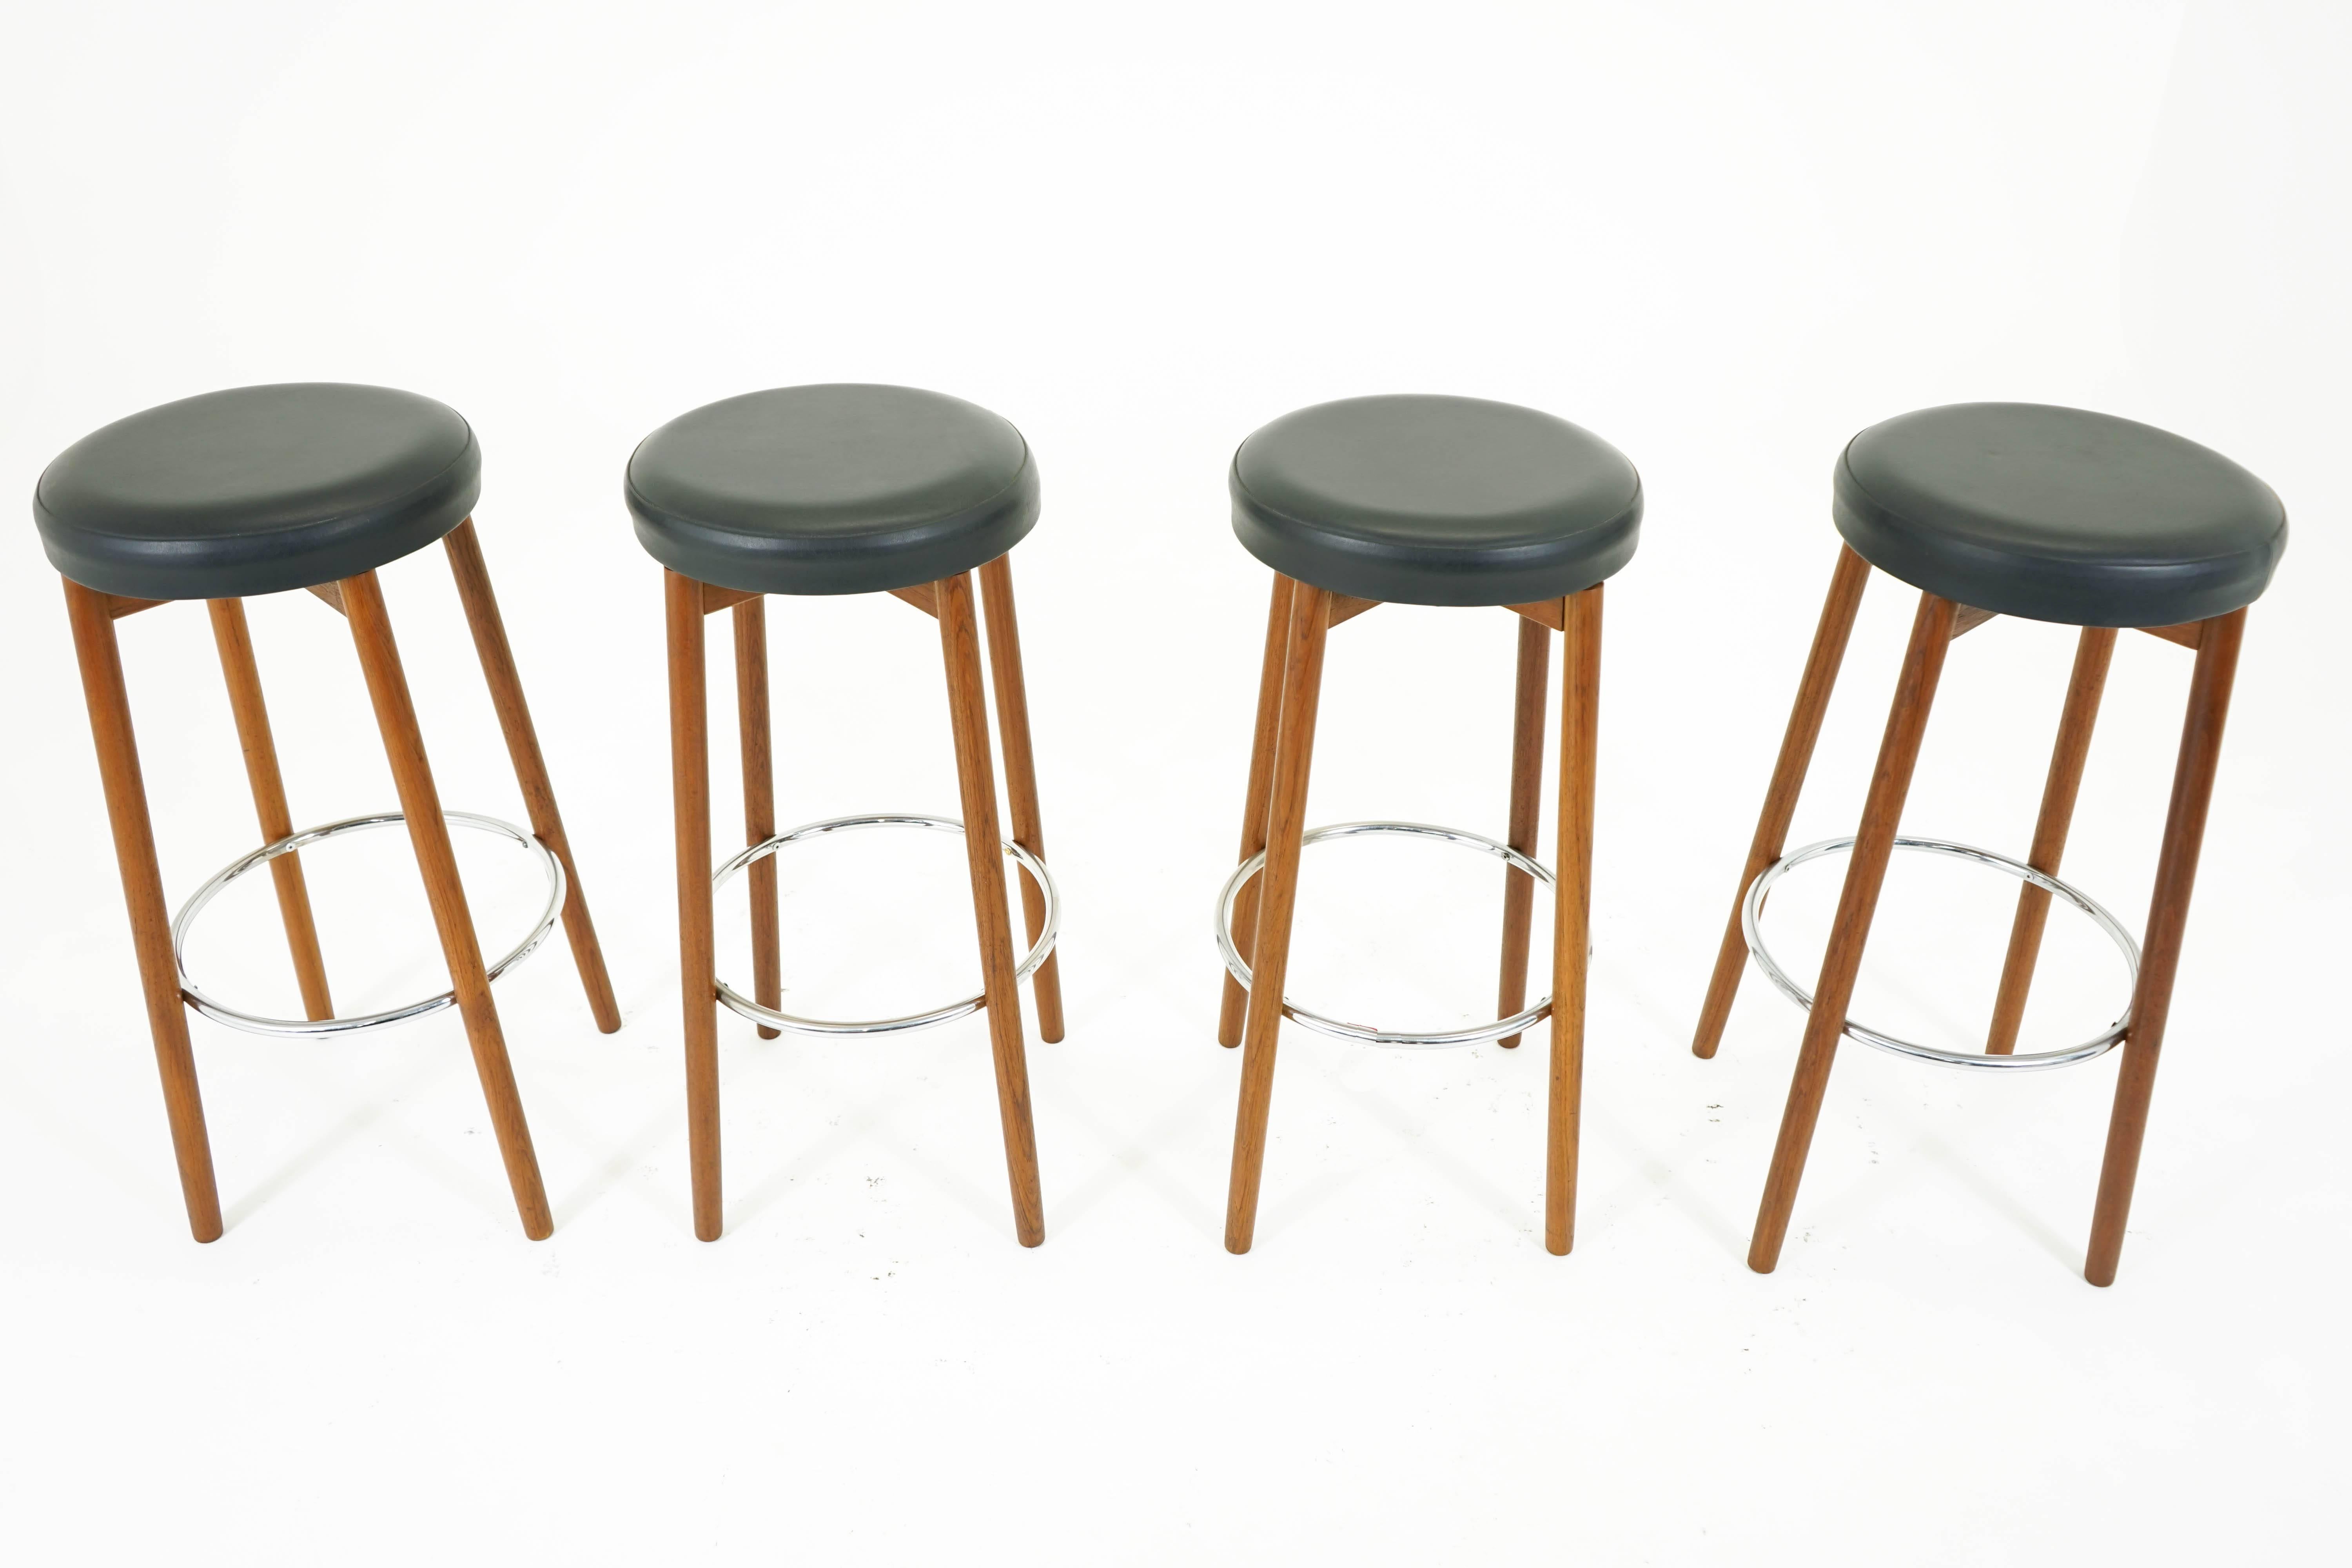 A set of four teak bar stools by Hugo Frandsen for Spottrup with chrome footrests and original leather upholstery. Solid construction in excellent vintage condition.